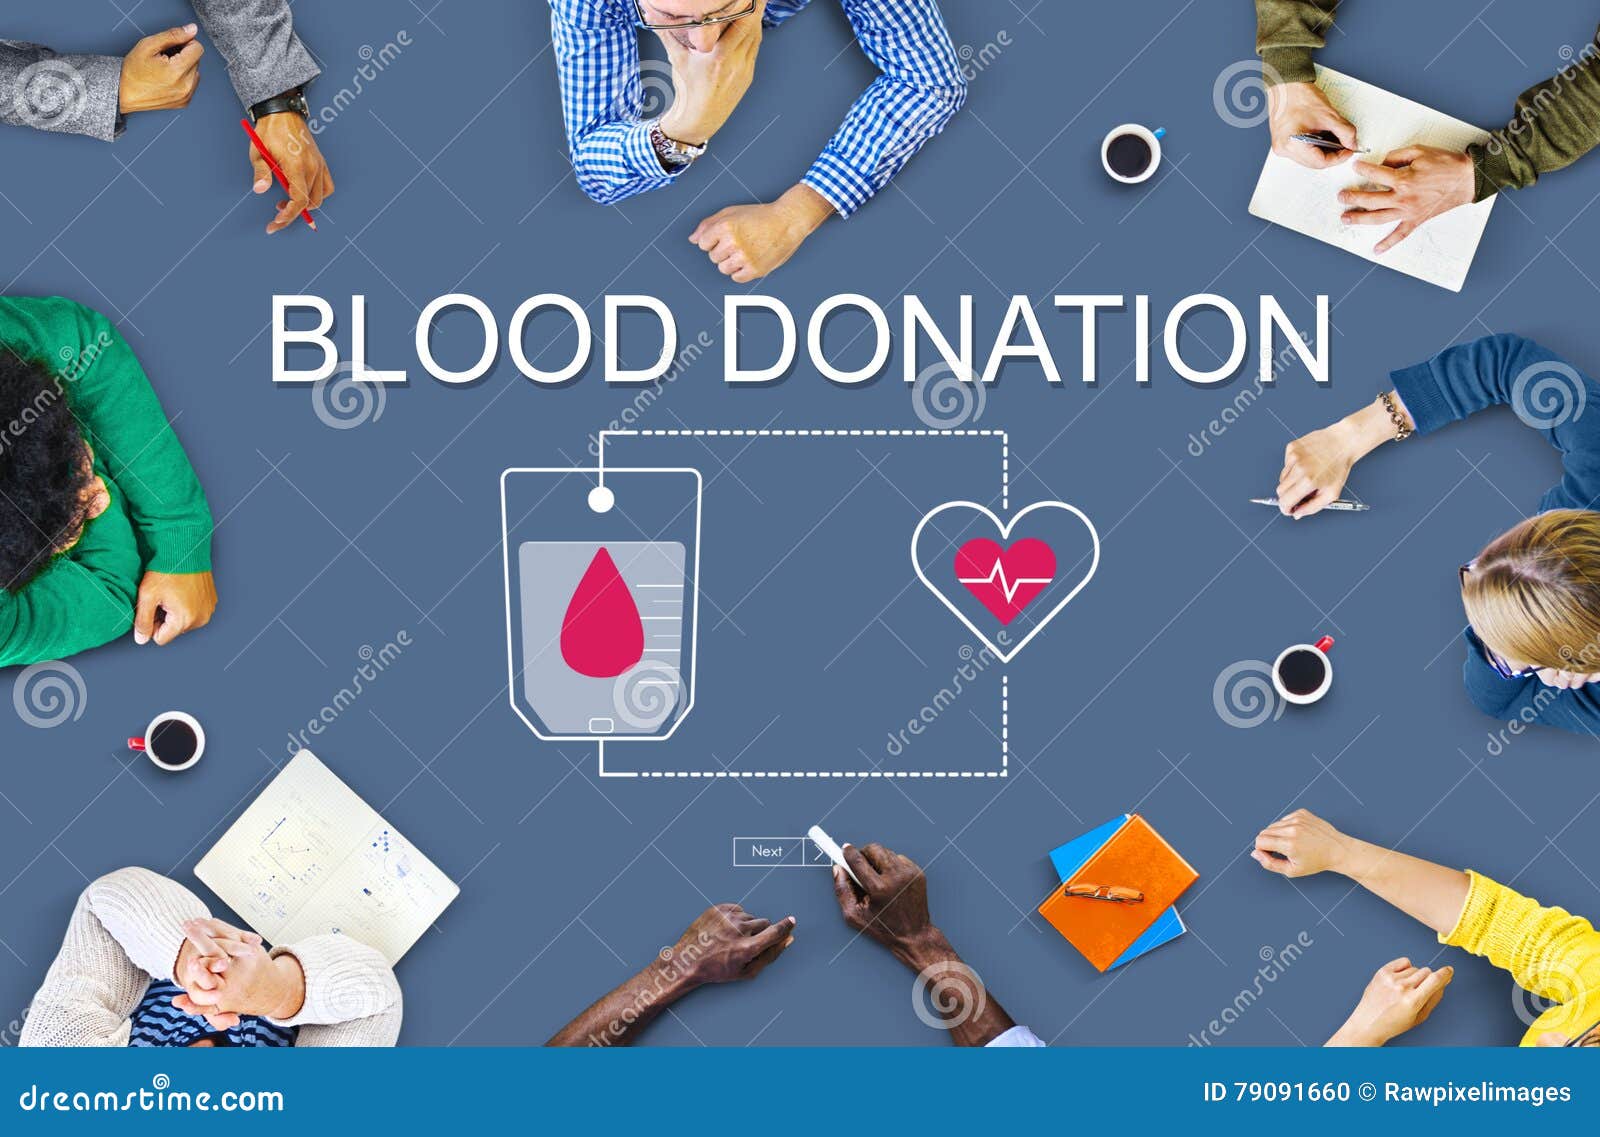 Blood Donation Aid Heart Care Concept. People having a Discussion Blood Donation Aid Heart Care